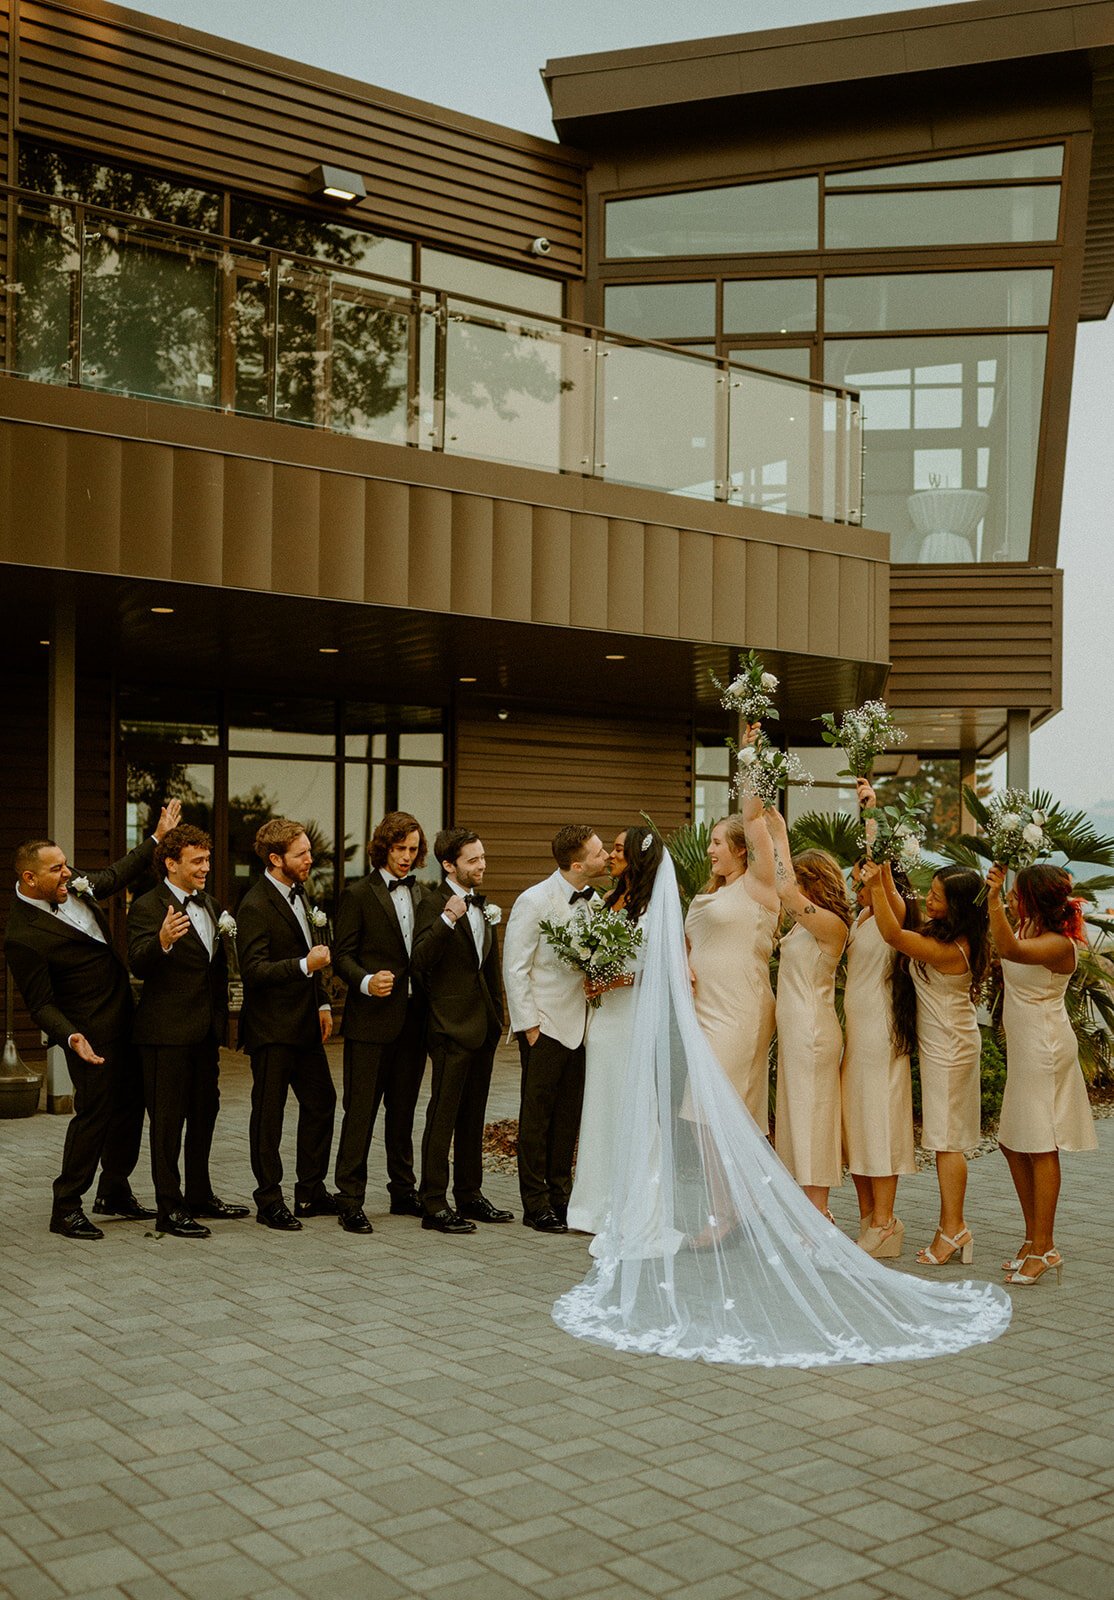  A bridal party standing on a waterfront patio. The bride is wearing TENNYSON by The Label, the groom is wearing a white tux, and the bridesmaids are wearing champagne silk dresses and the grooms are wearing black tuxedos.  